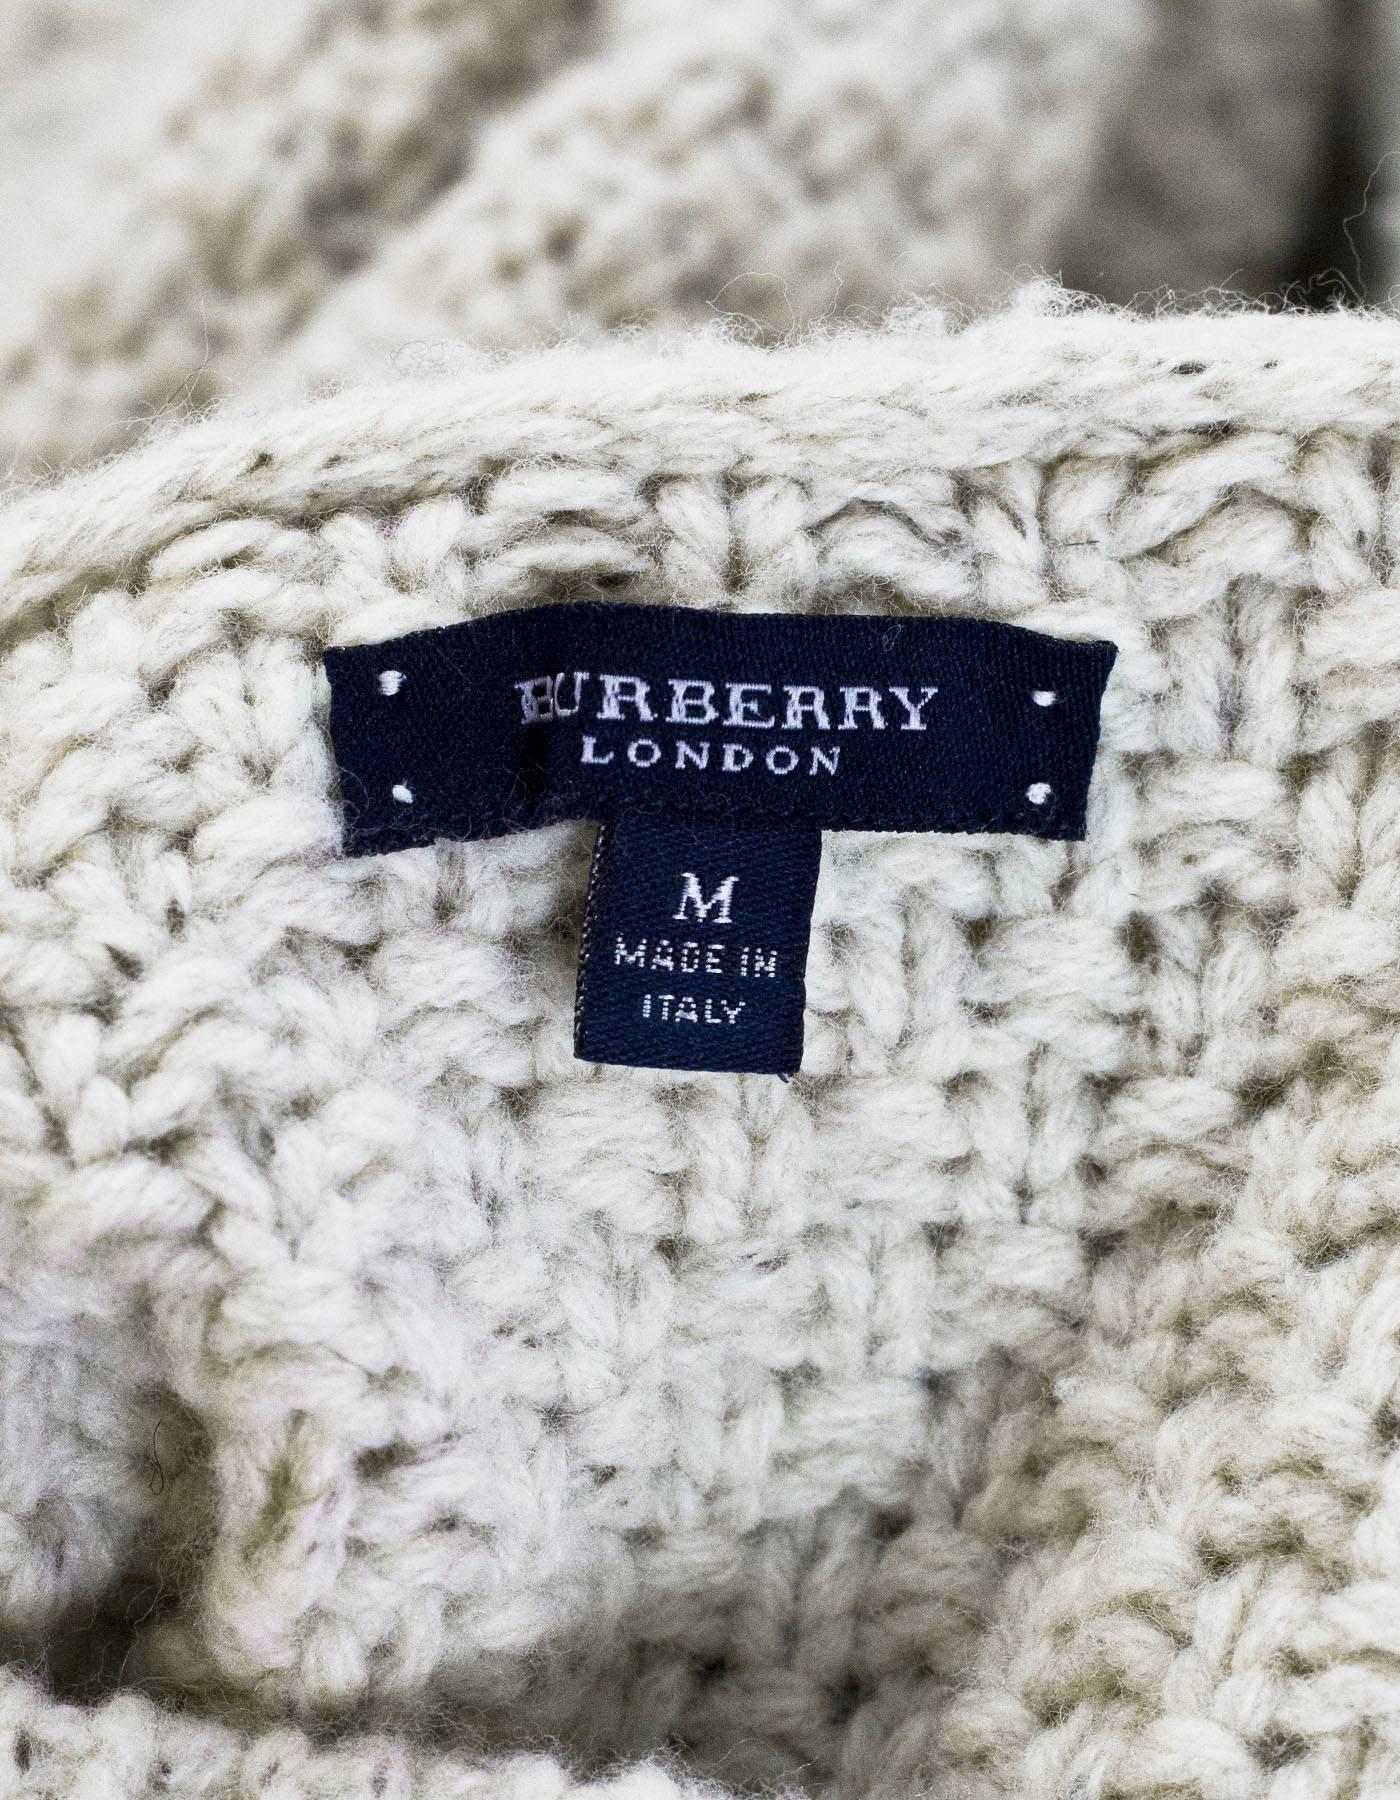 Gray Burberry Cream Wool Cable-Knit Sweater Sz M